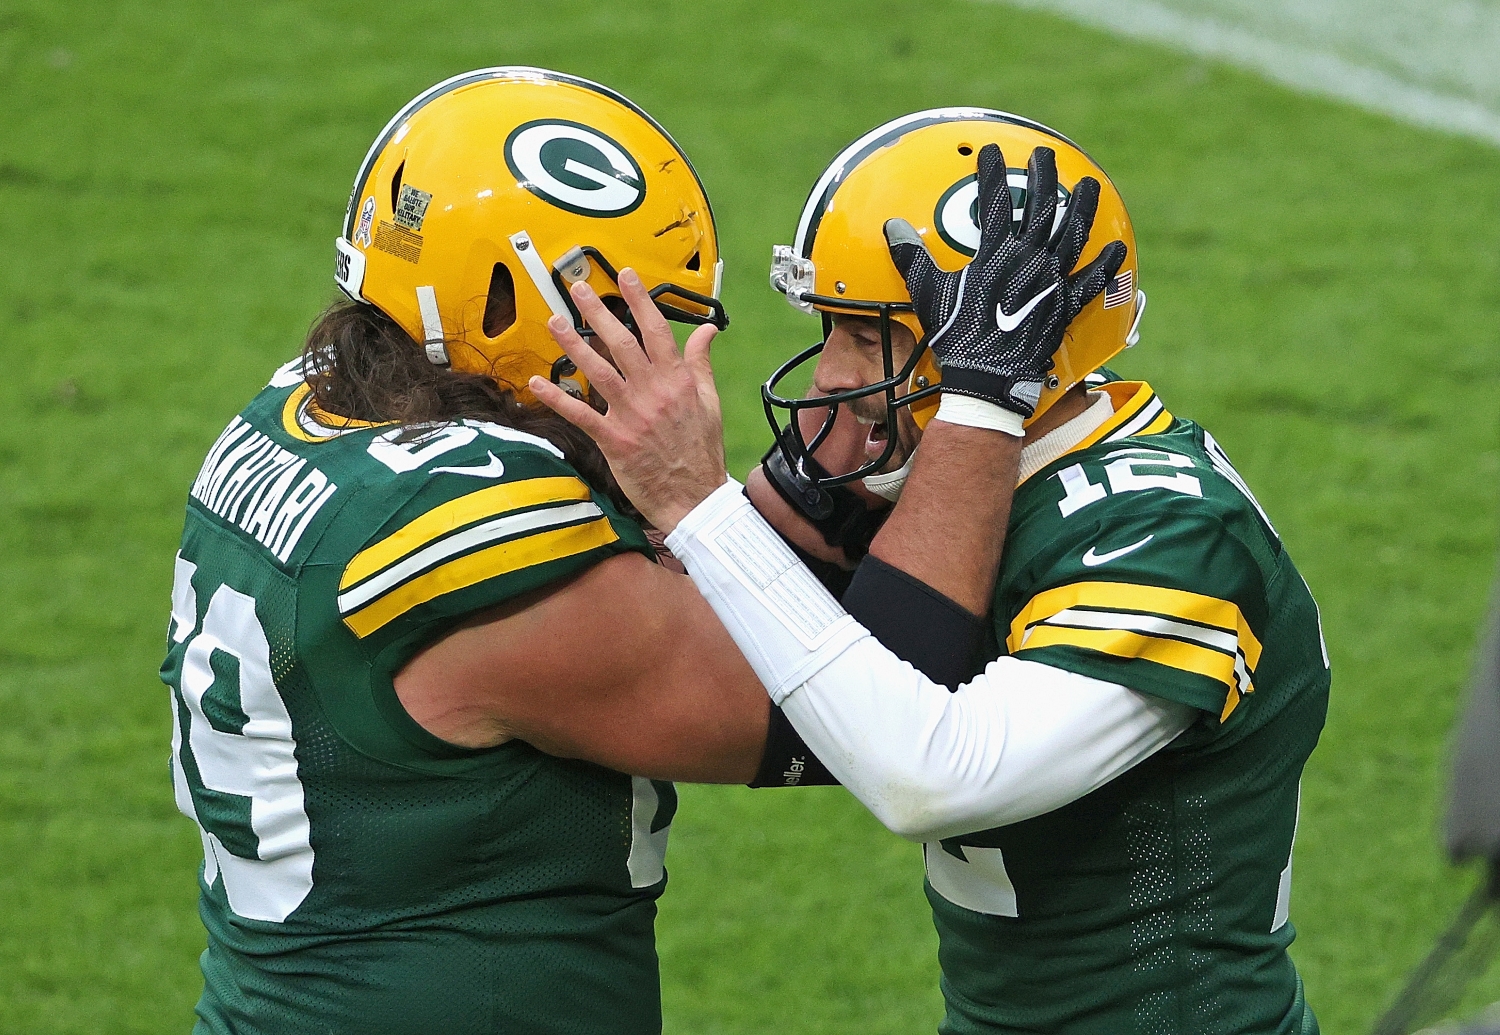 Green Bay Packers teammates David Bakhtiari and Aaron Rodgers celebrate scoring a touchdown.